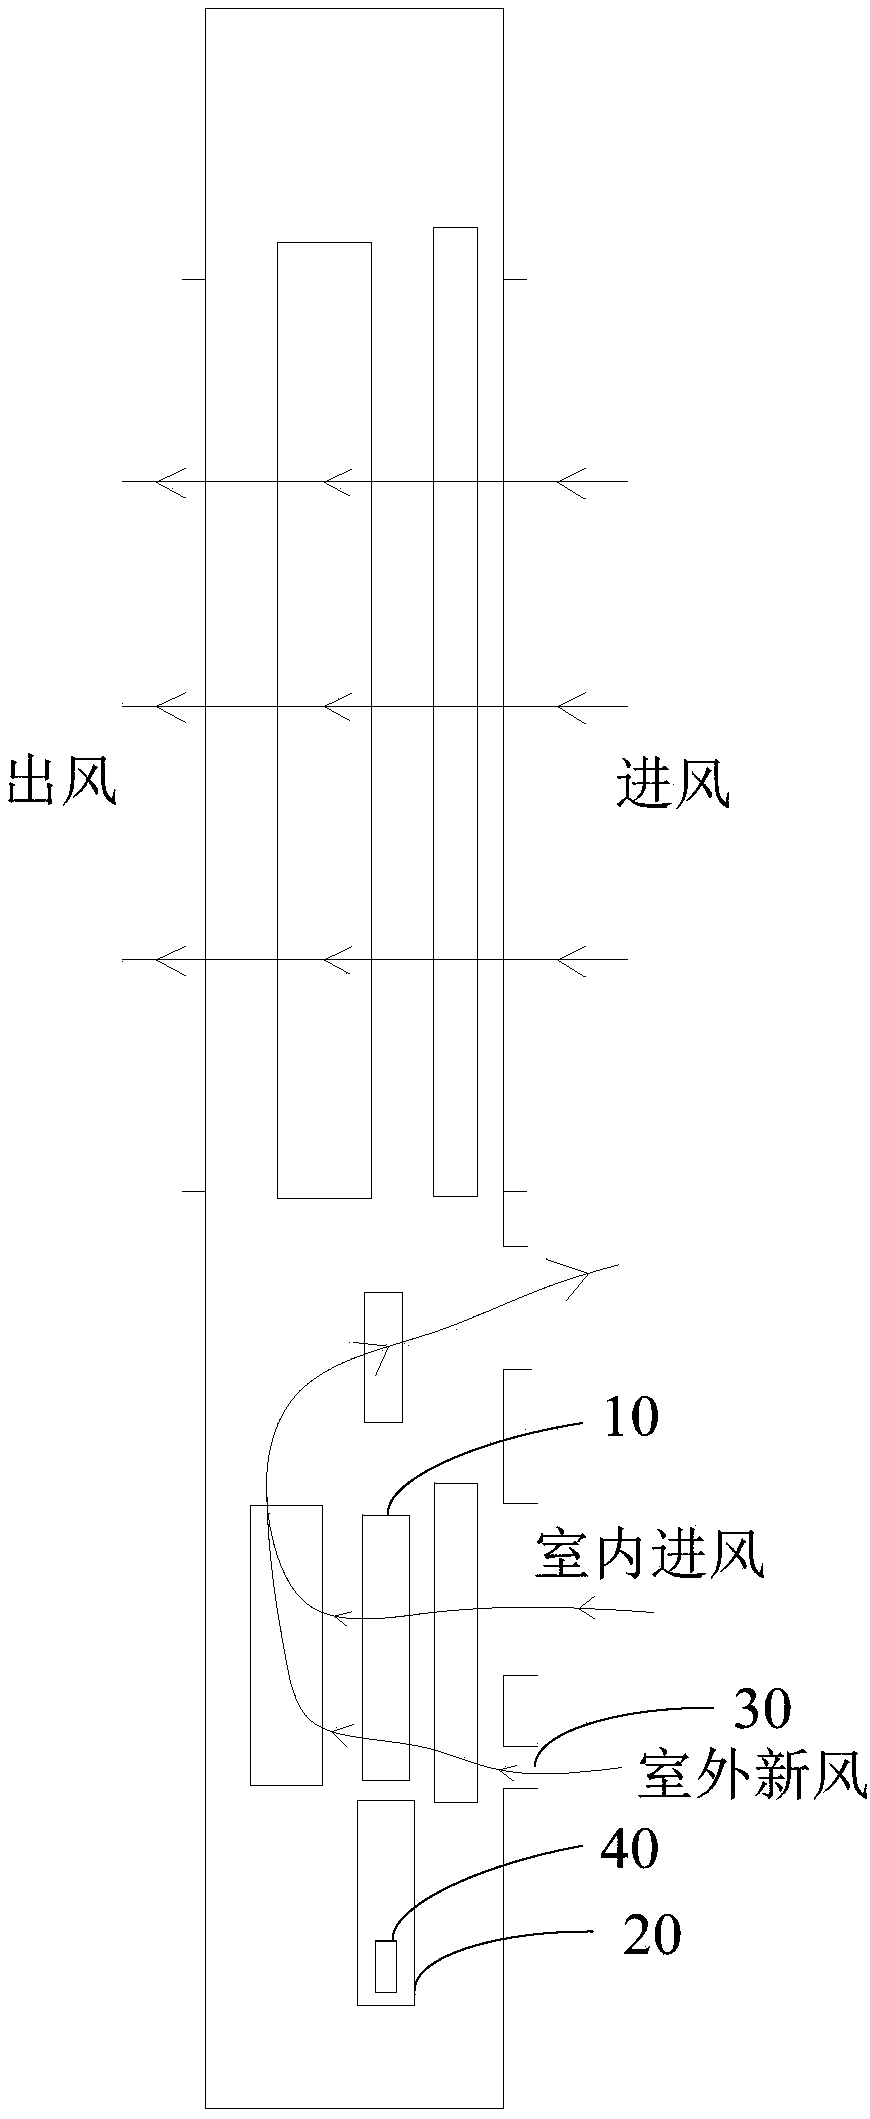 Control method and control device for air conditioner, and computer readable storage medium